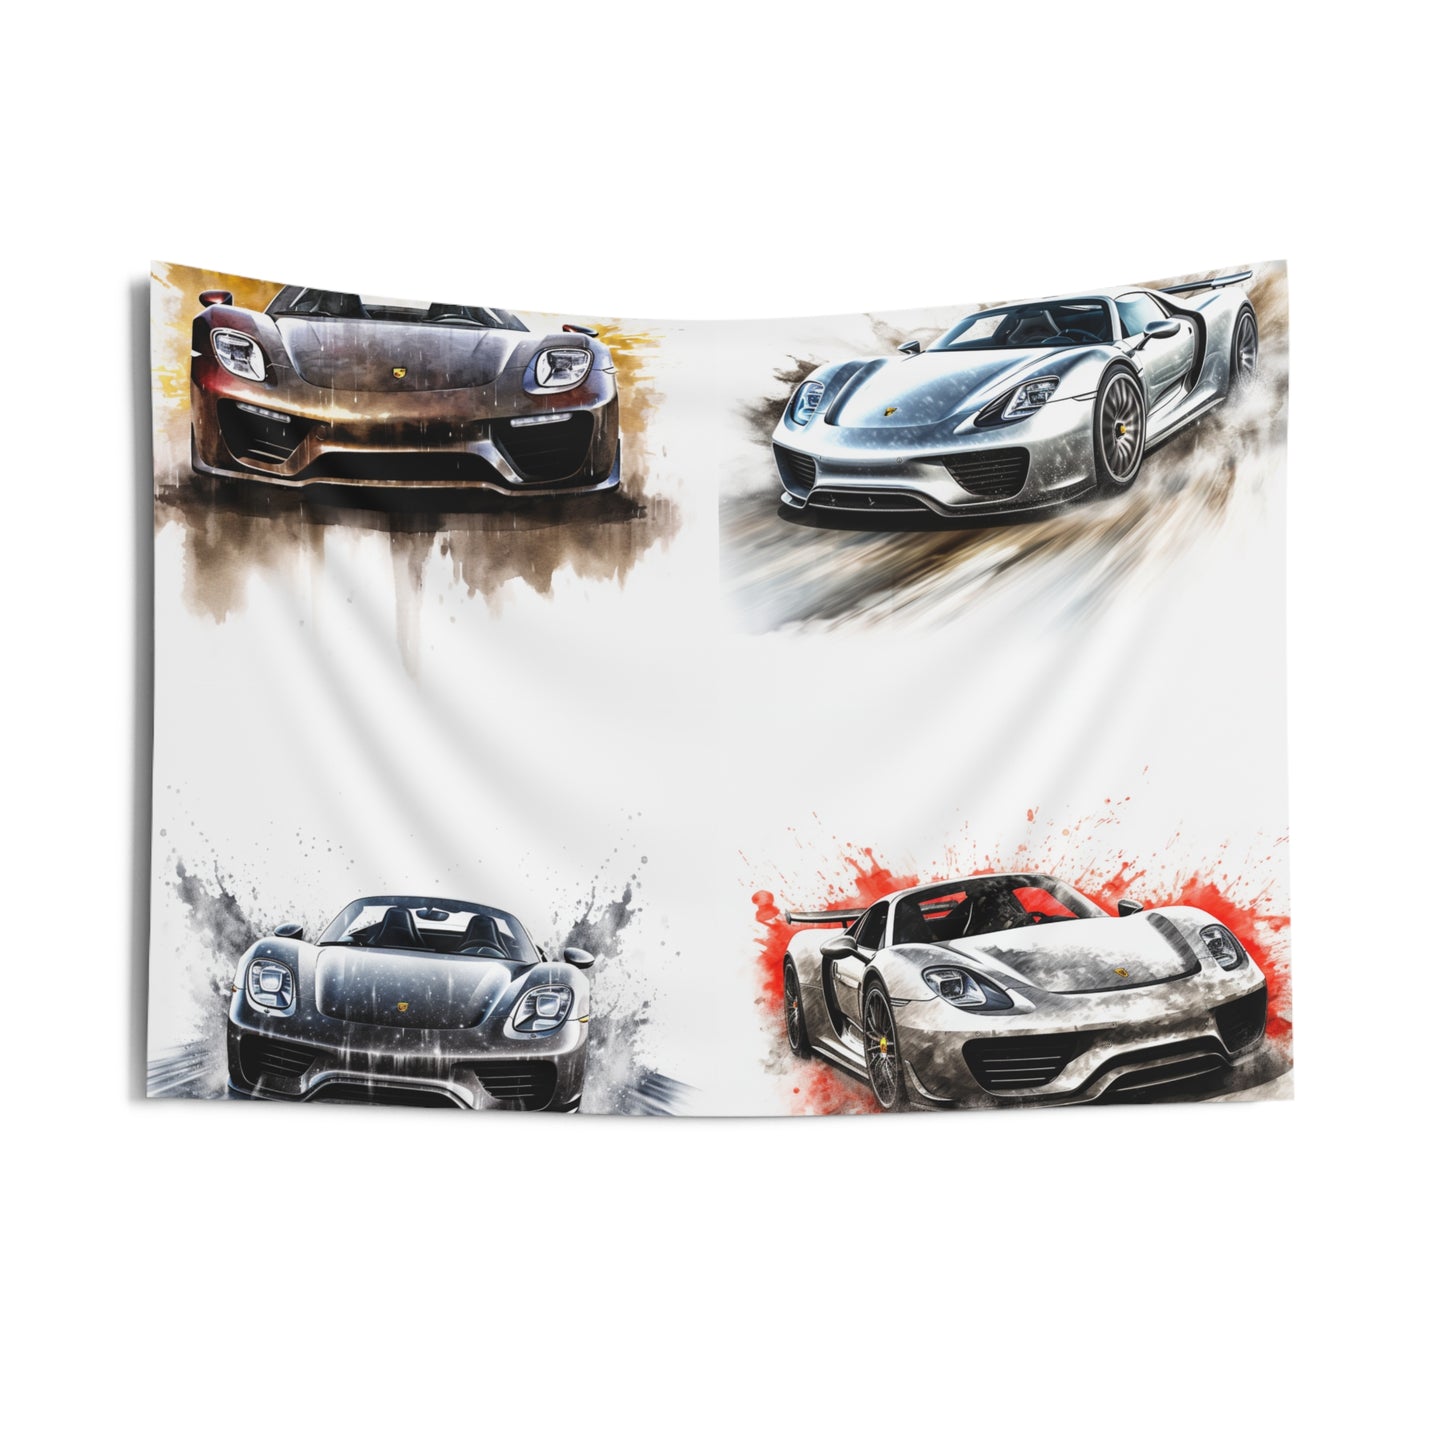 Indoor Wall Tapestries 918 Spyder white background driving fast with water splashing 5